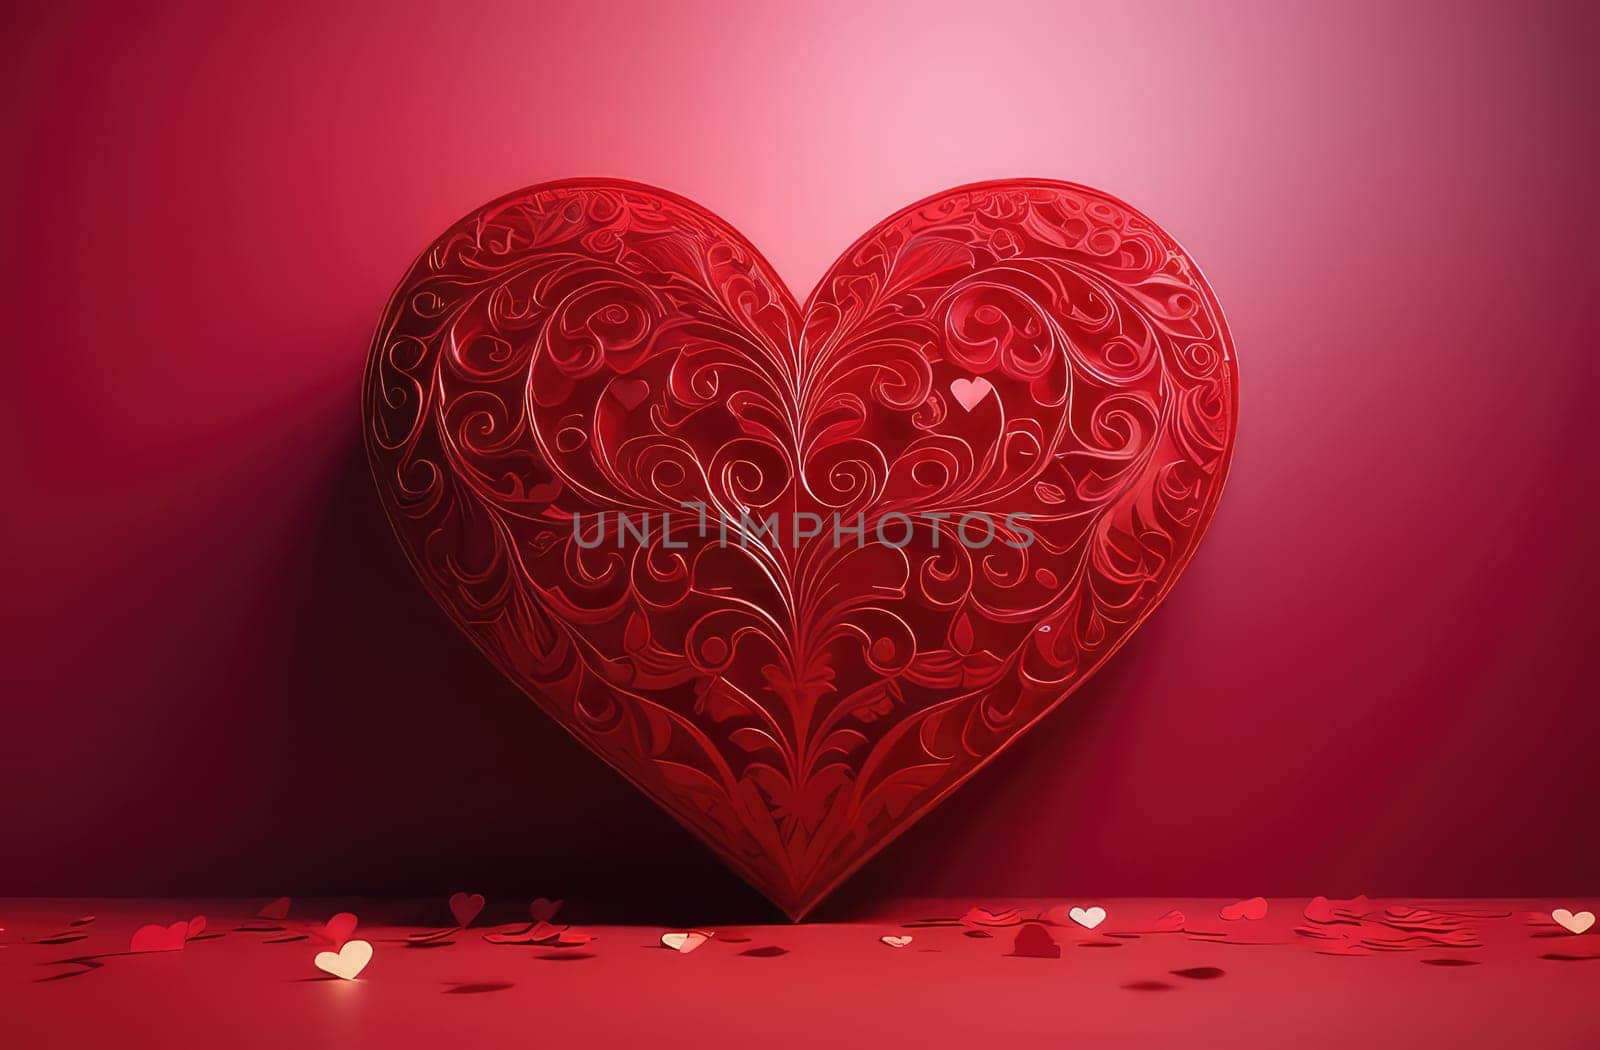 St Valentines day, wedding banner with red ornamental heart on red background. Use for love sale banner, voucher, greeting card. Copy space. Beautiful love background for valentines day greeting card. by Angelsmoon